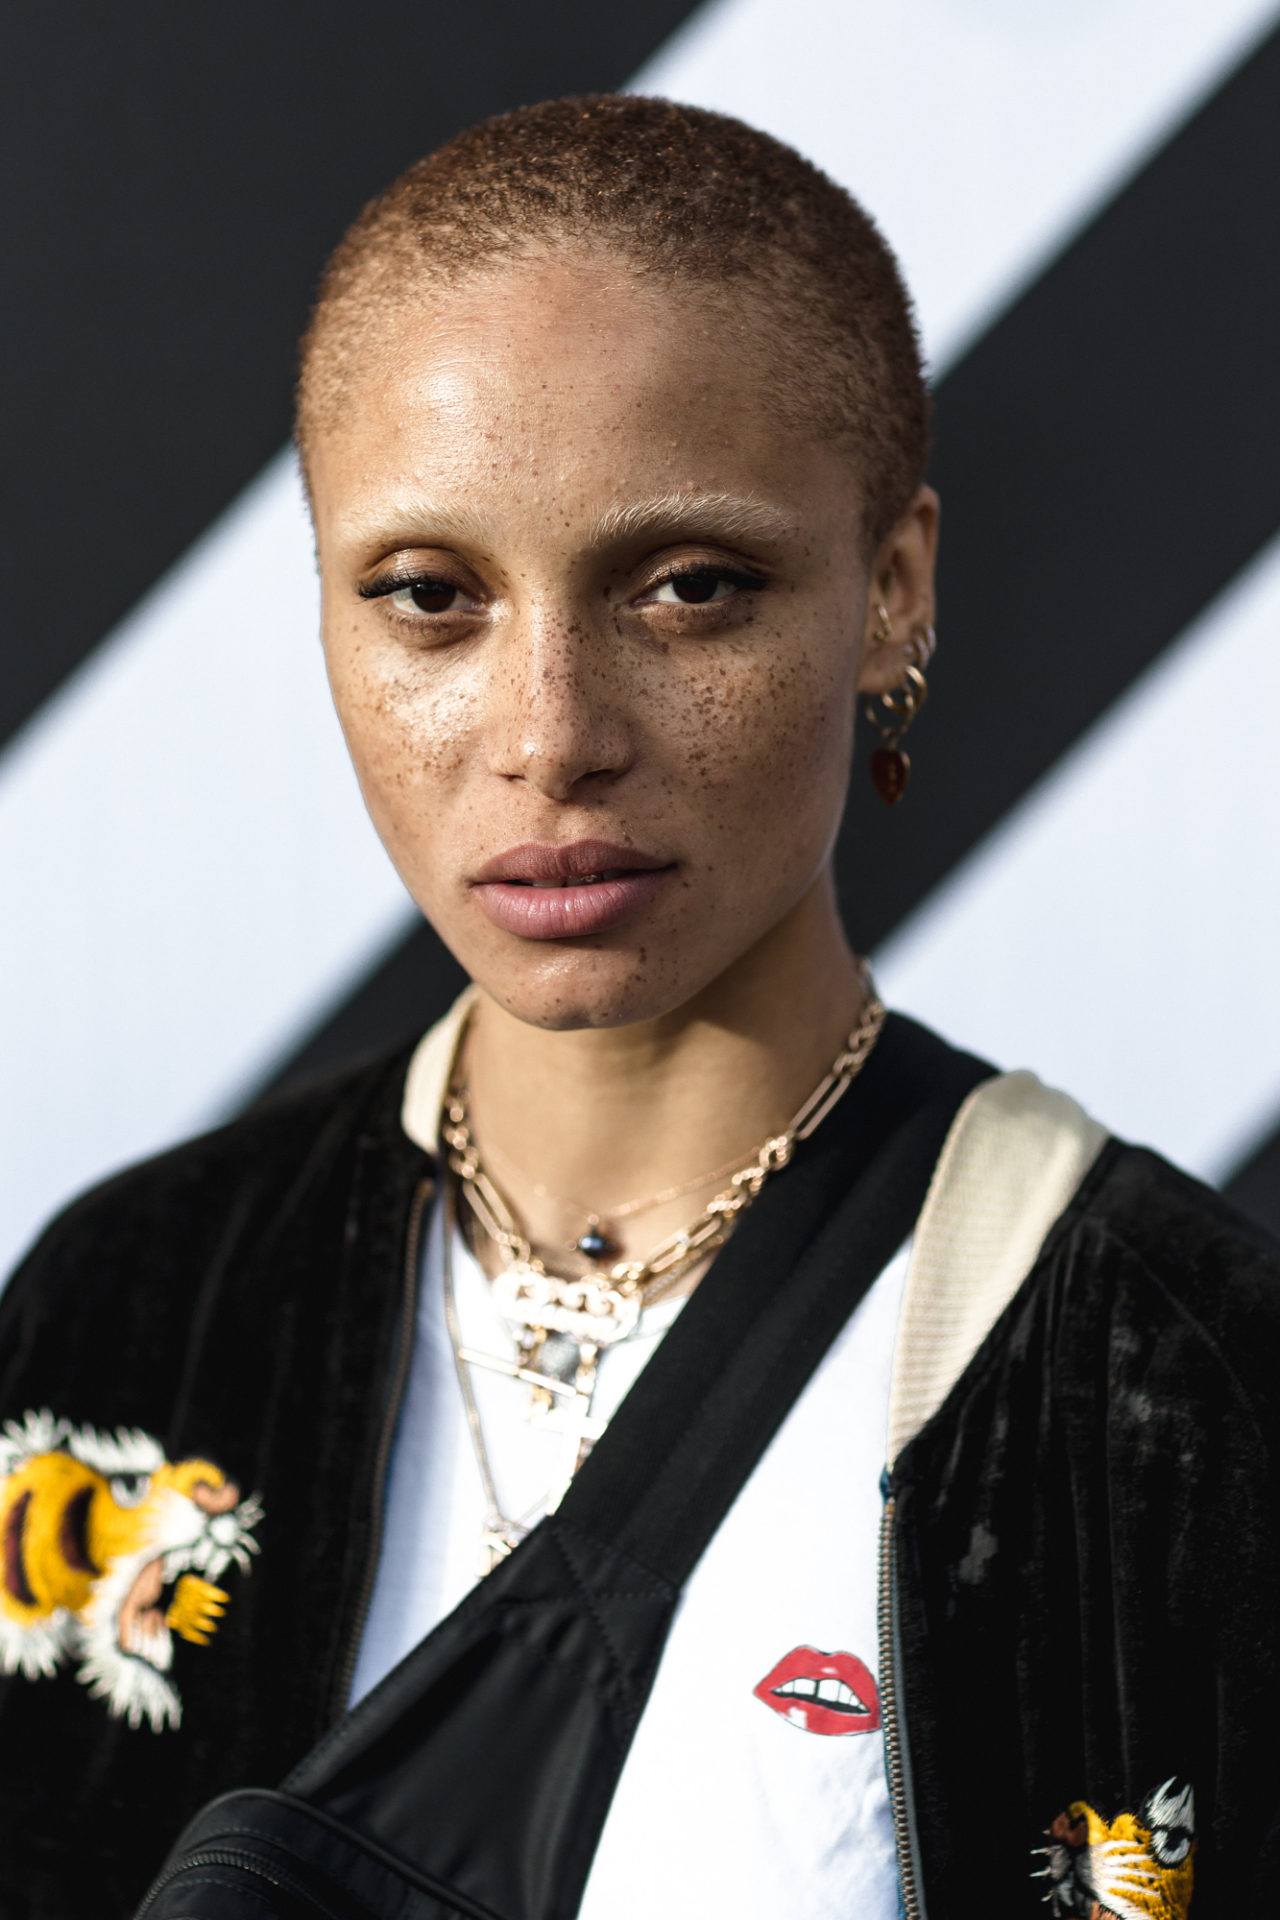 Adwoa Aboah at the Bread and Butter Pre Event in Berlin